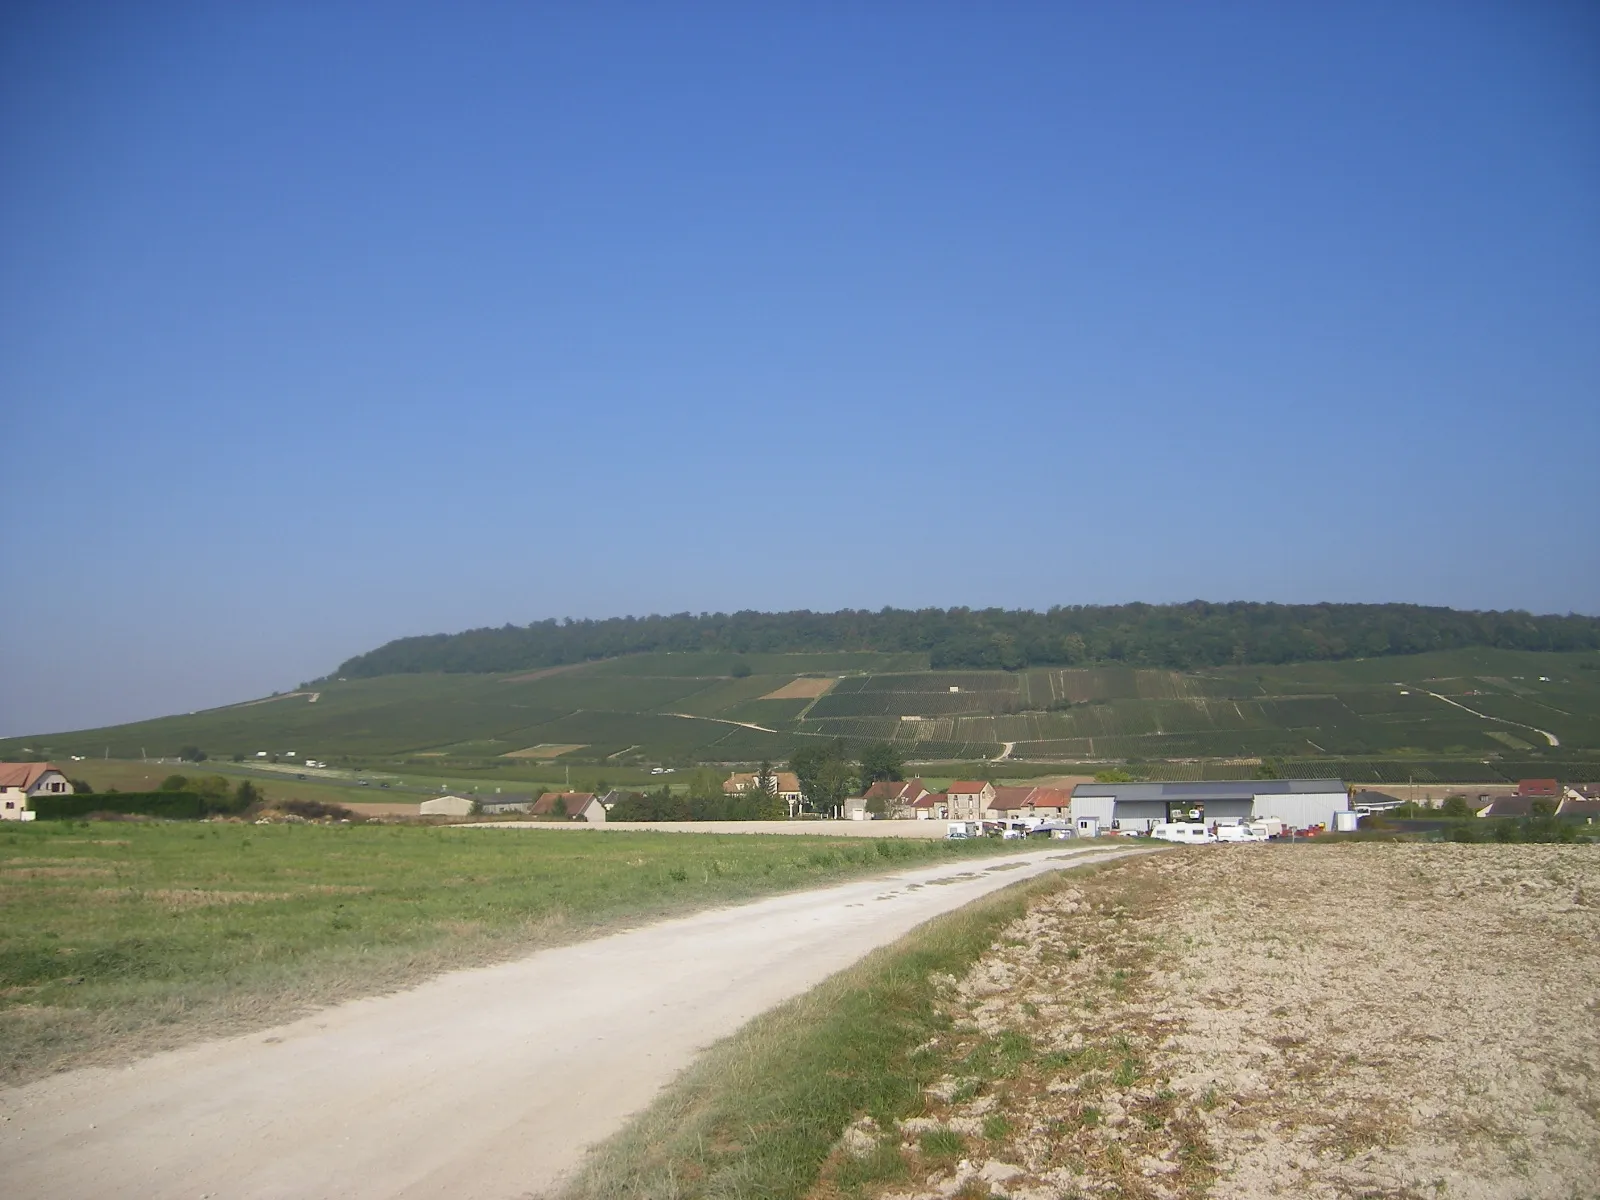 Image of Champagne-Ardenne